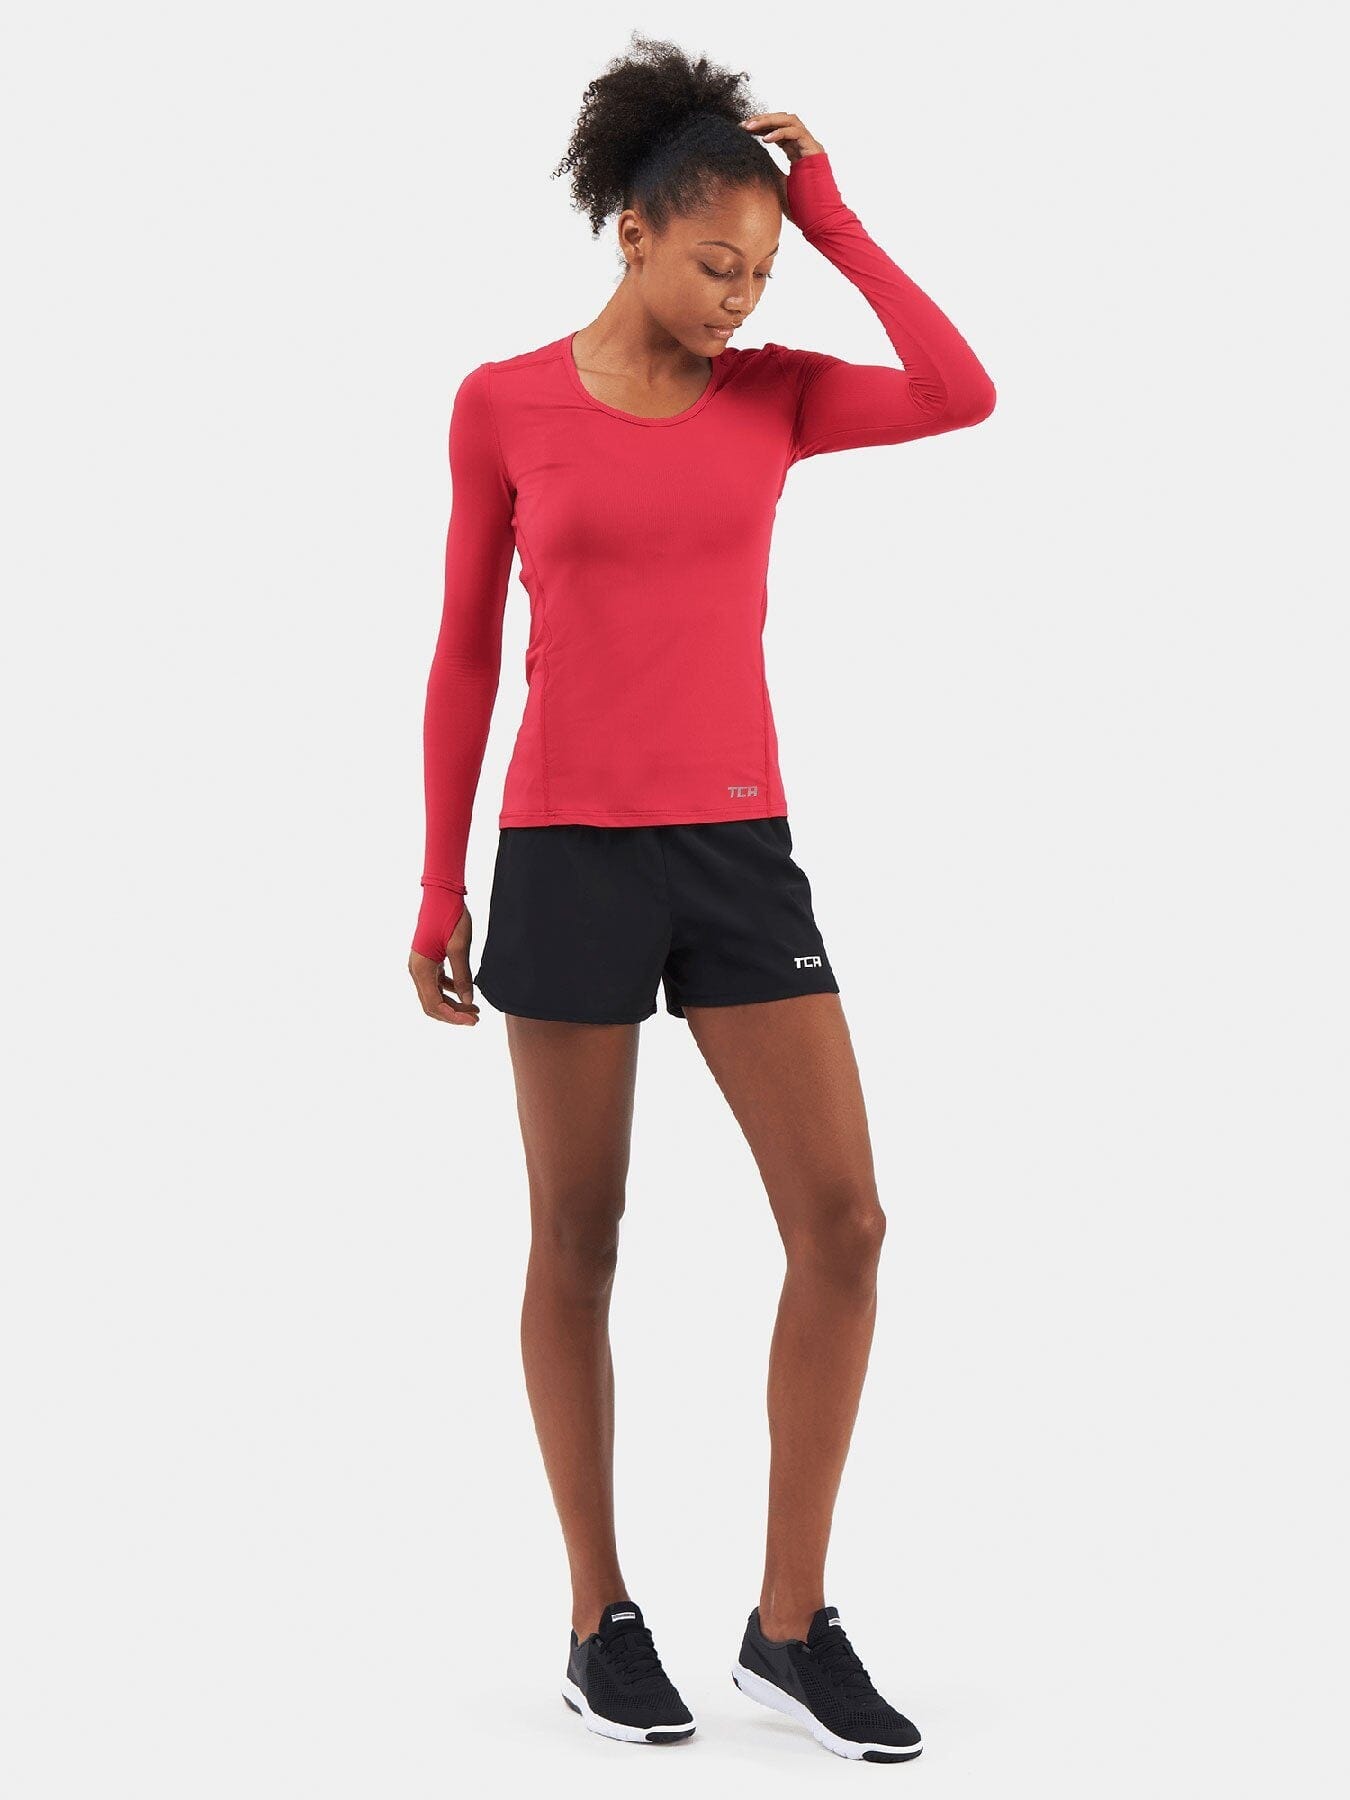 Stamina Long Sleeve Crew Neck Running Top For Women With Thumbholes & Back Zip Pocket